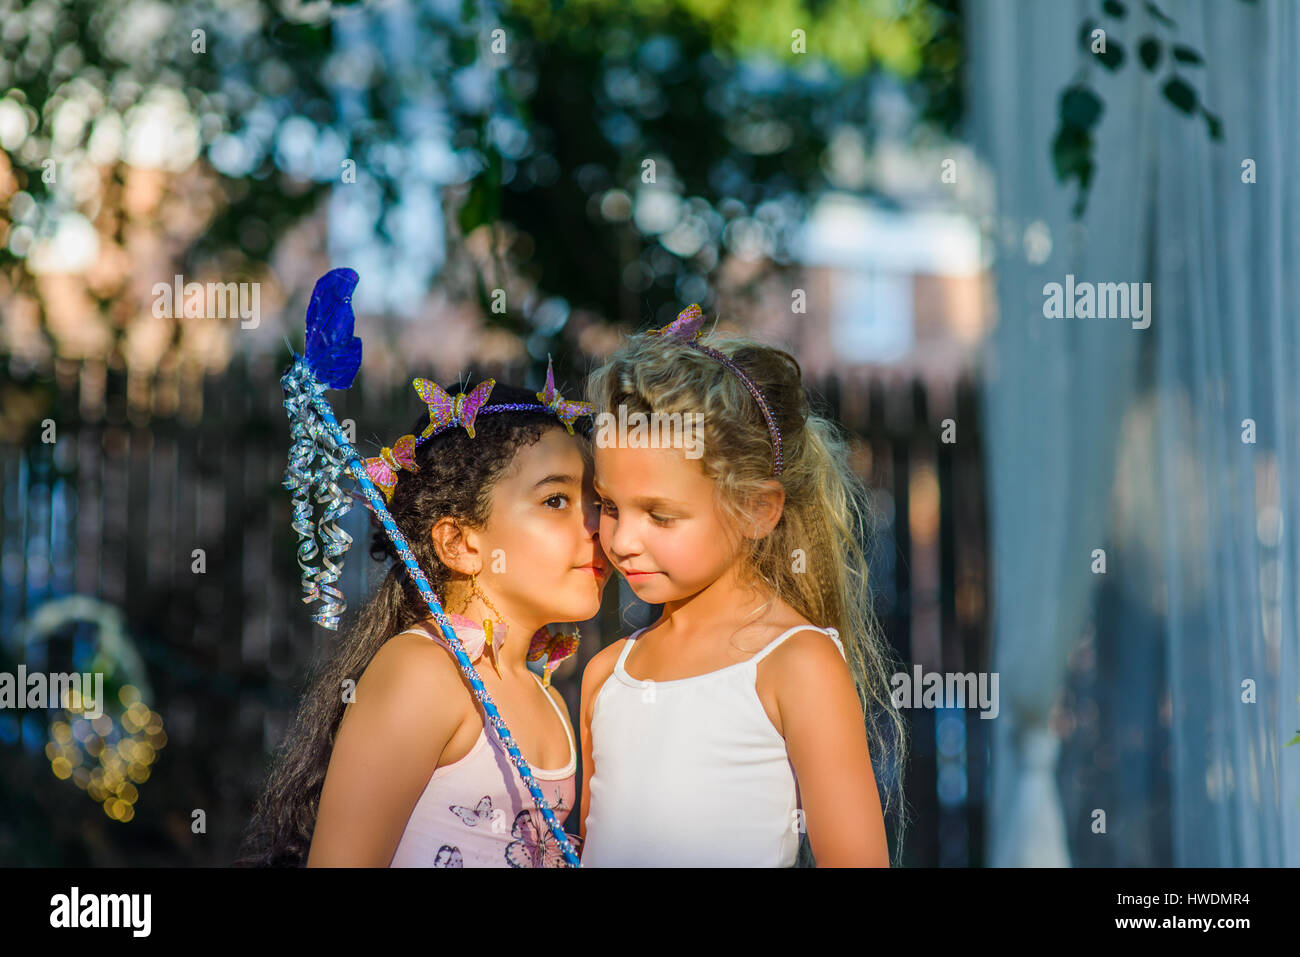 Two young girls dressed as fairies, girl whispering in friend's ear Stock Photo